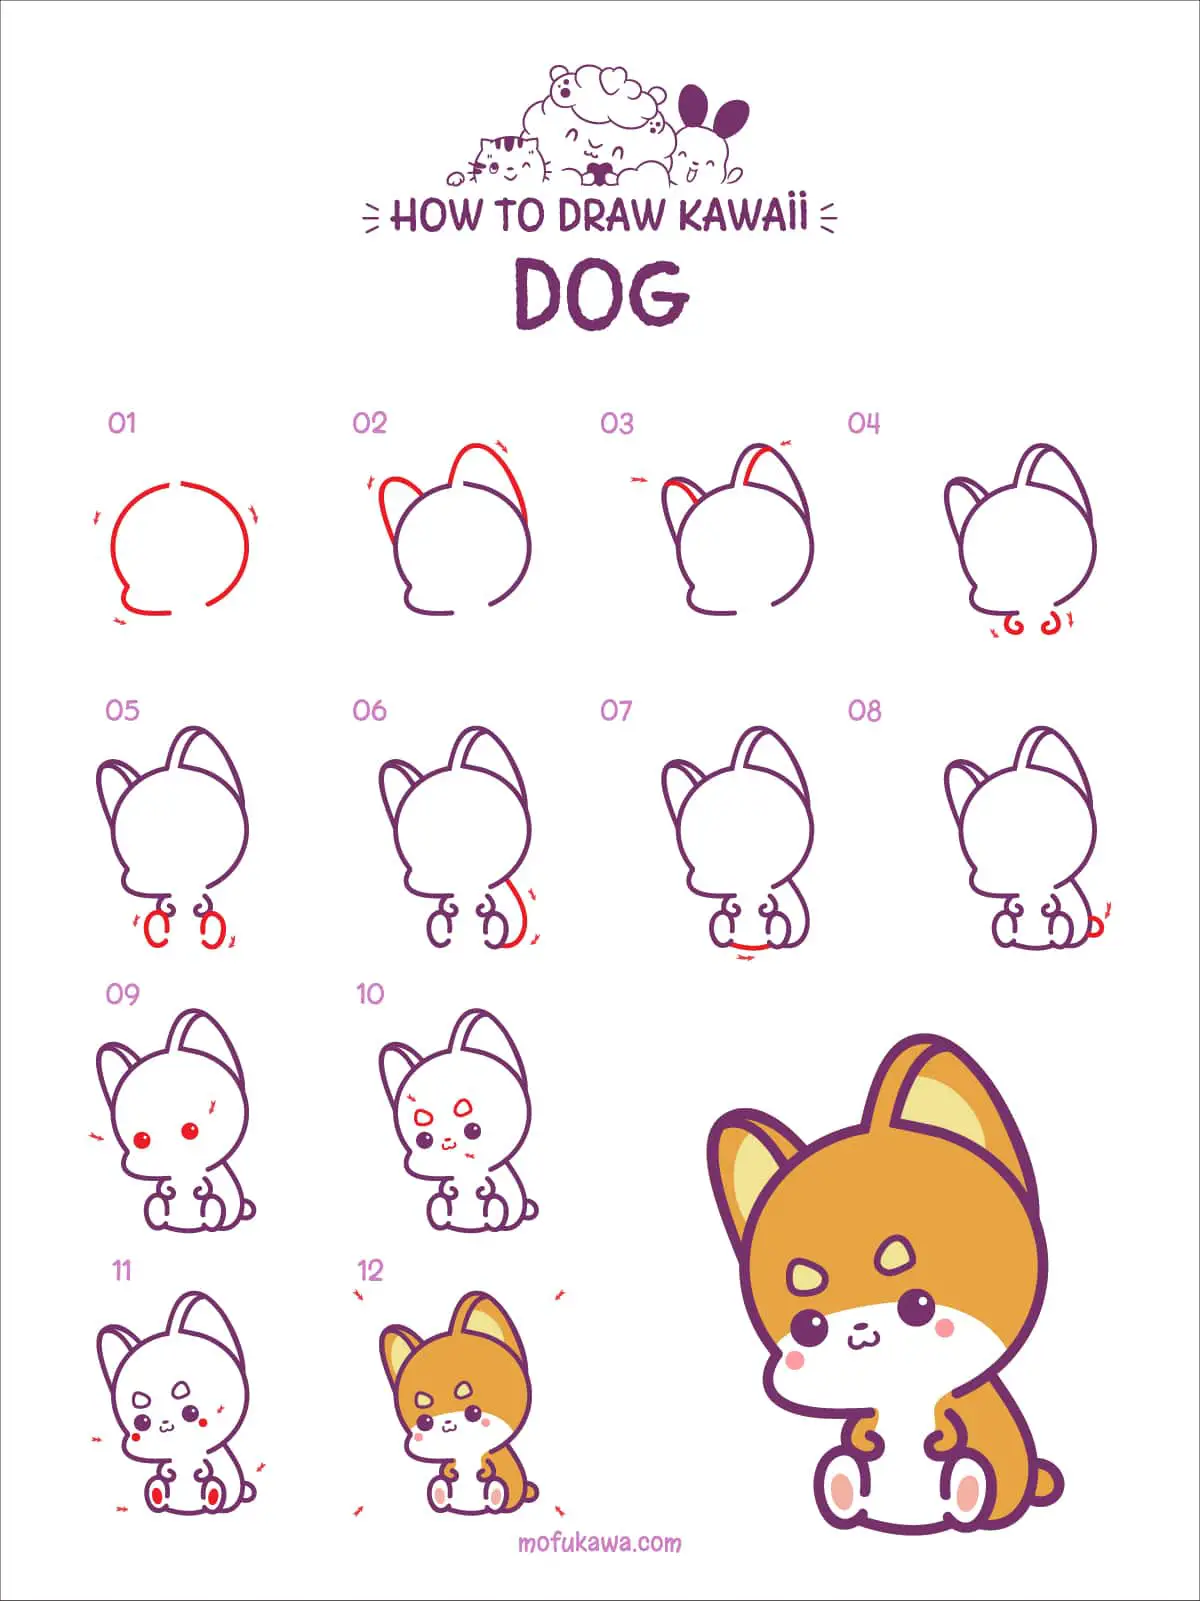 How to Draw Biscuit the Dog from Facebook Messenger – Kawaii / Chibi Style Dog  Easy Step by Step Drawing Tutorial | How to Draw Step by Step Drawing  Tutorials